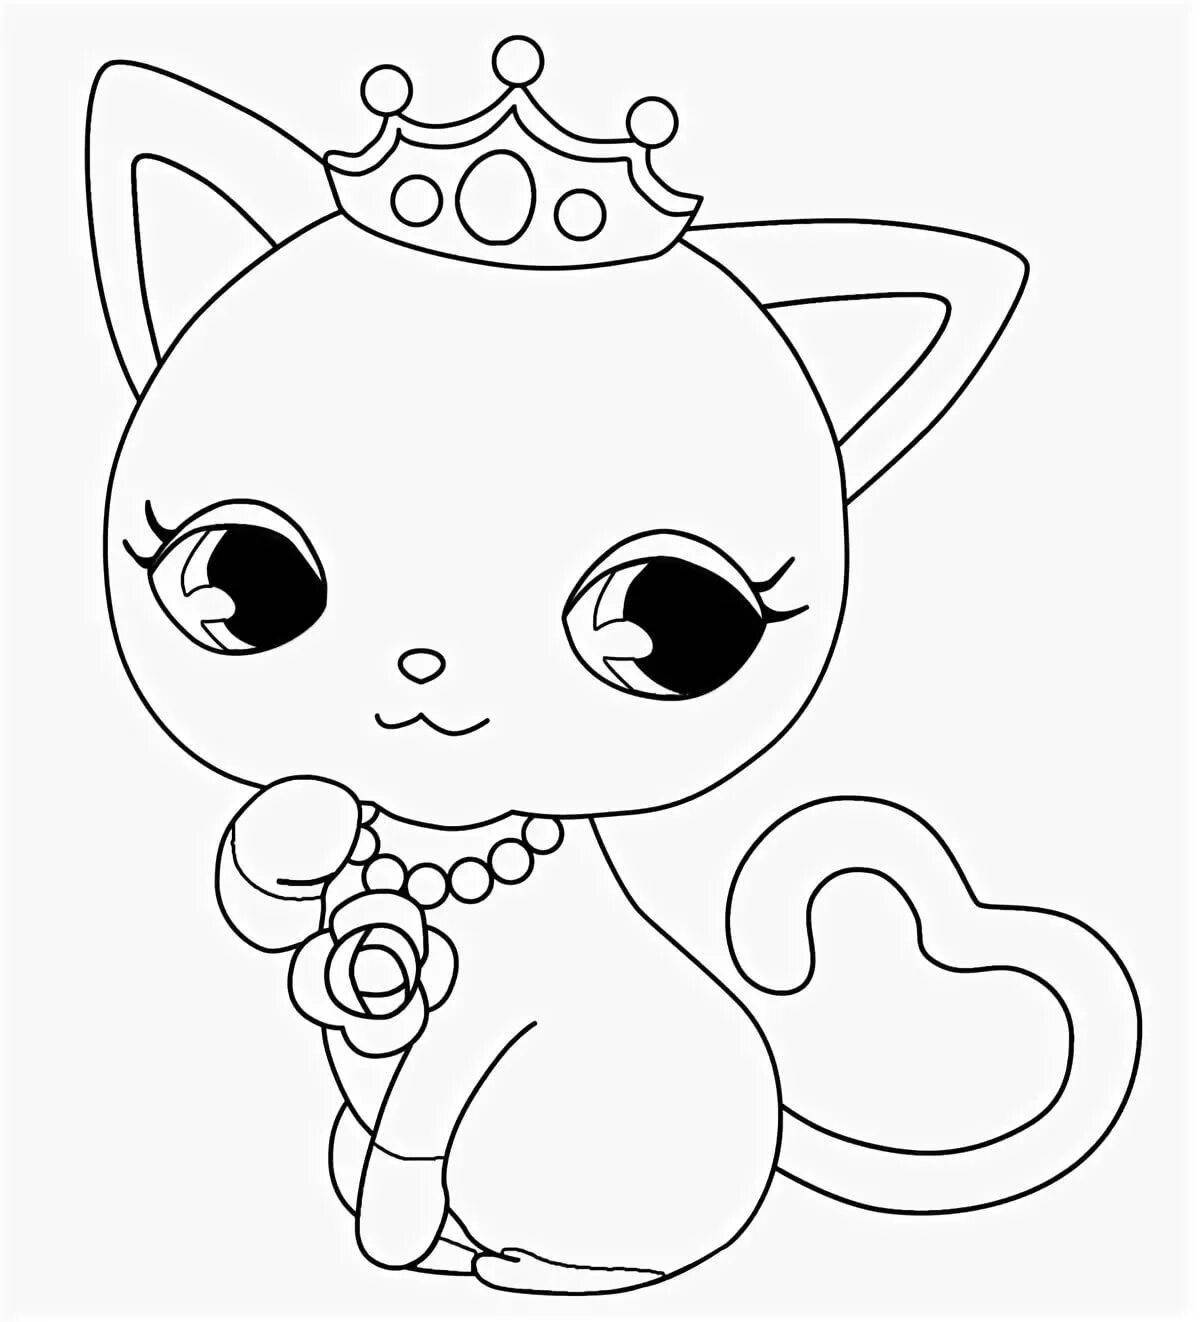 Coloring book shining lily kitty